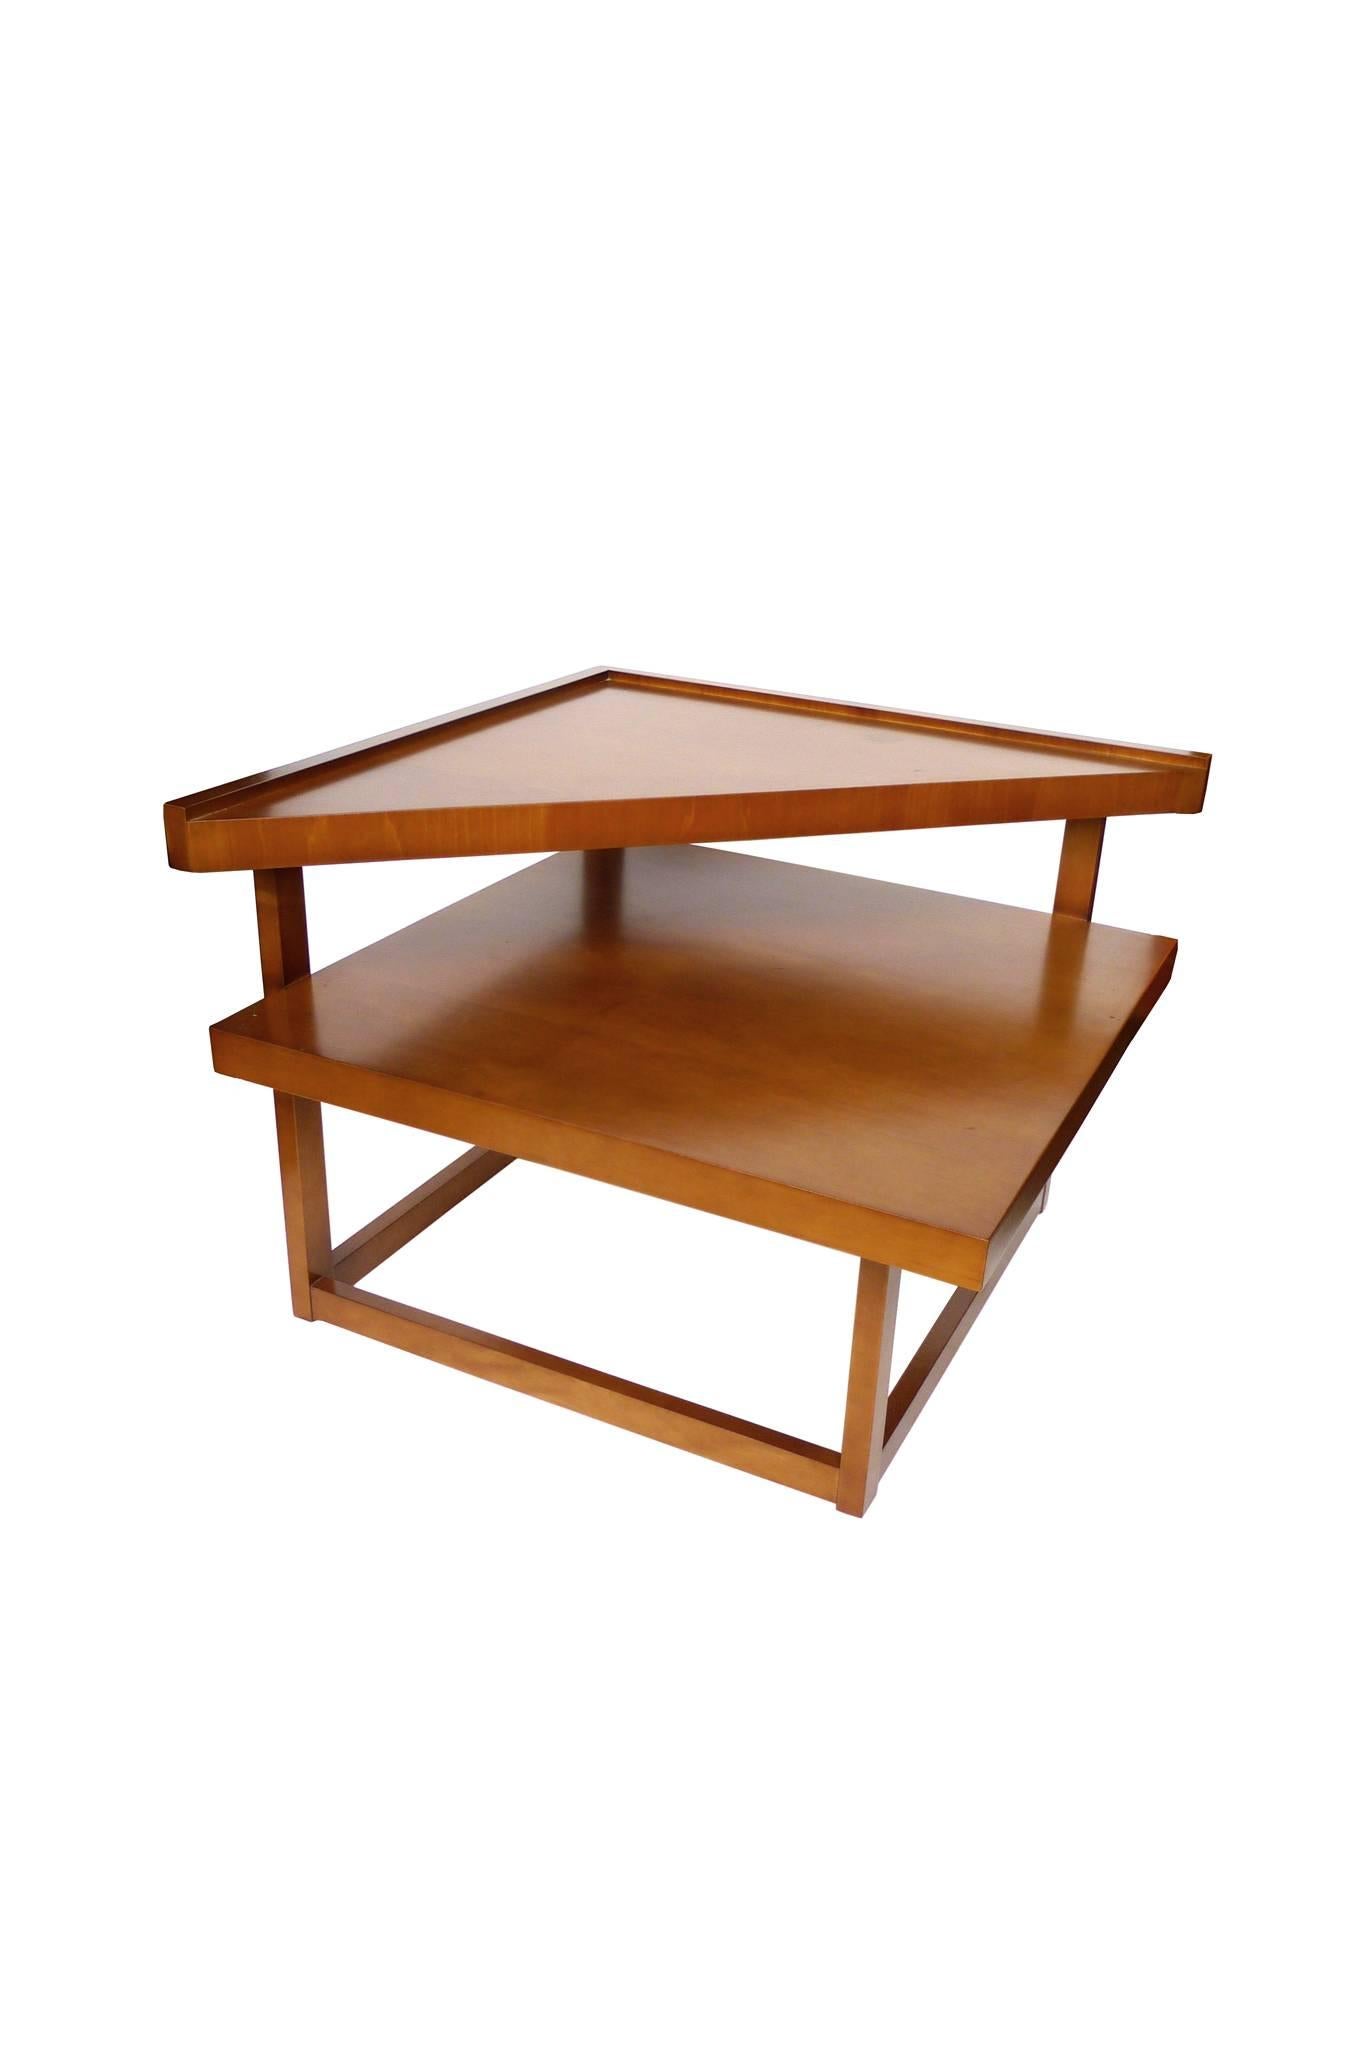 This Midcentury tiered corner table is by Brown-Saltman. It is blond mahogany, rich in hue and with a smooth surface. The modernist design is dynamic in form, making use of straight lines and simple shapes. This is an exceptional table that